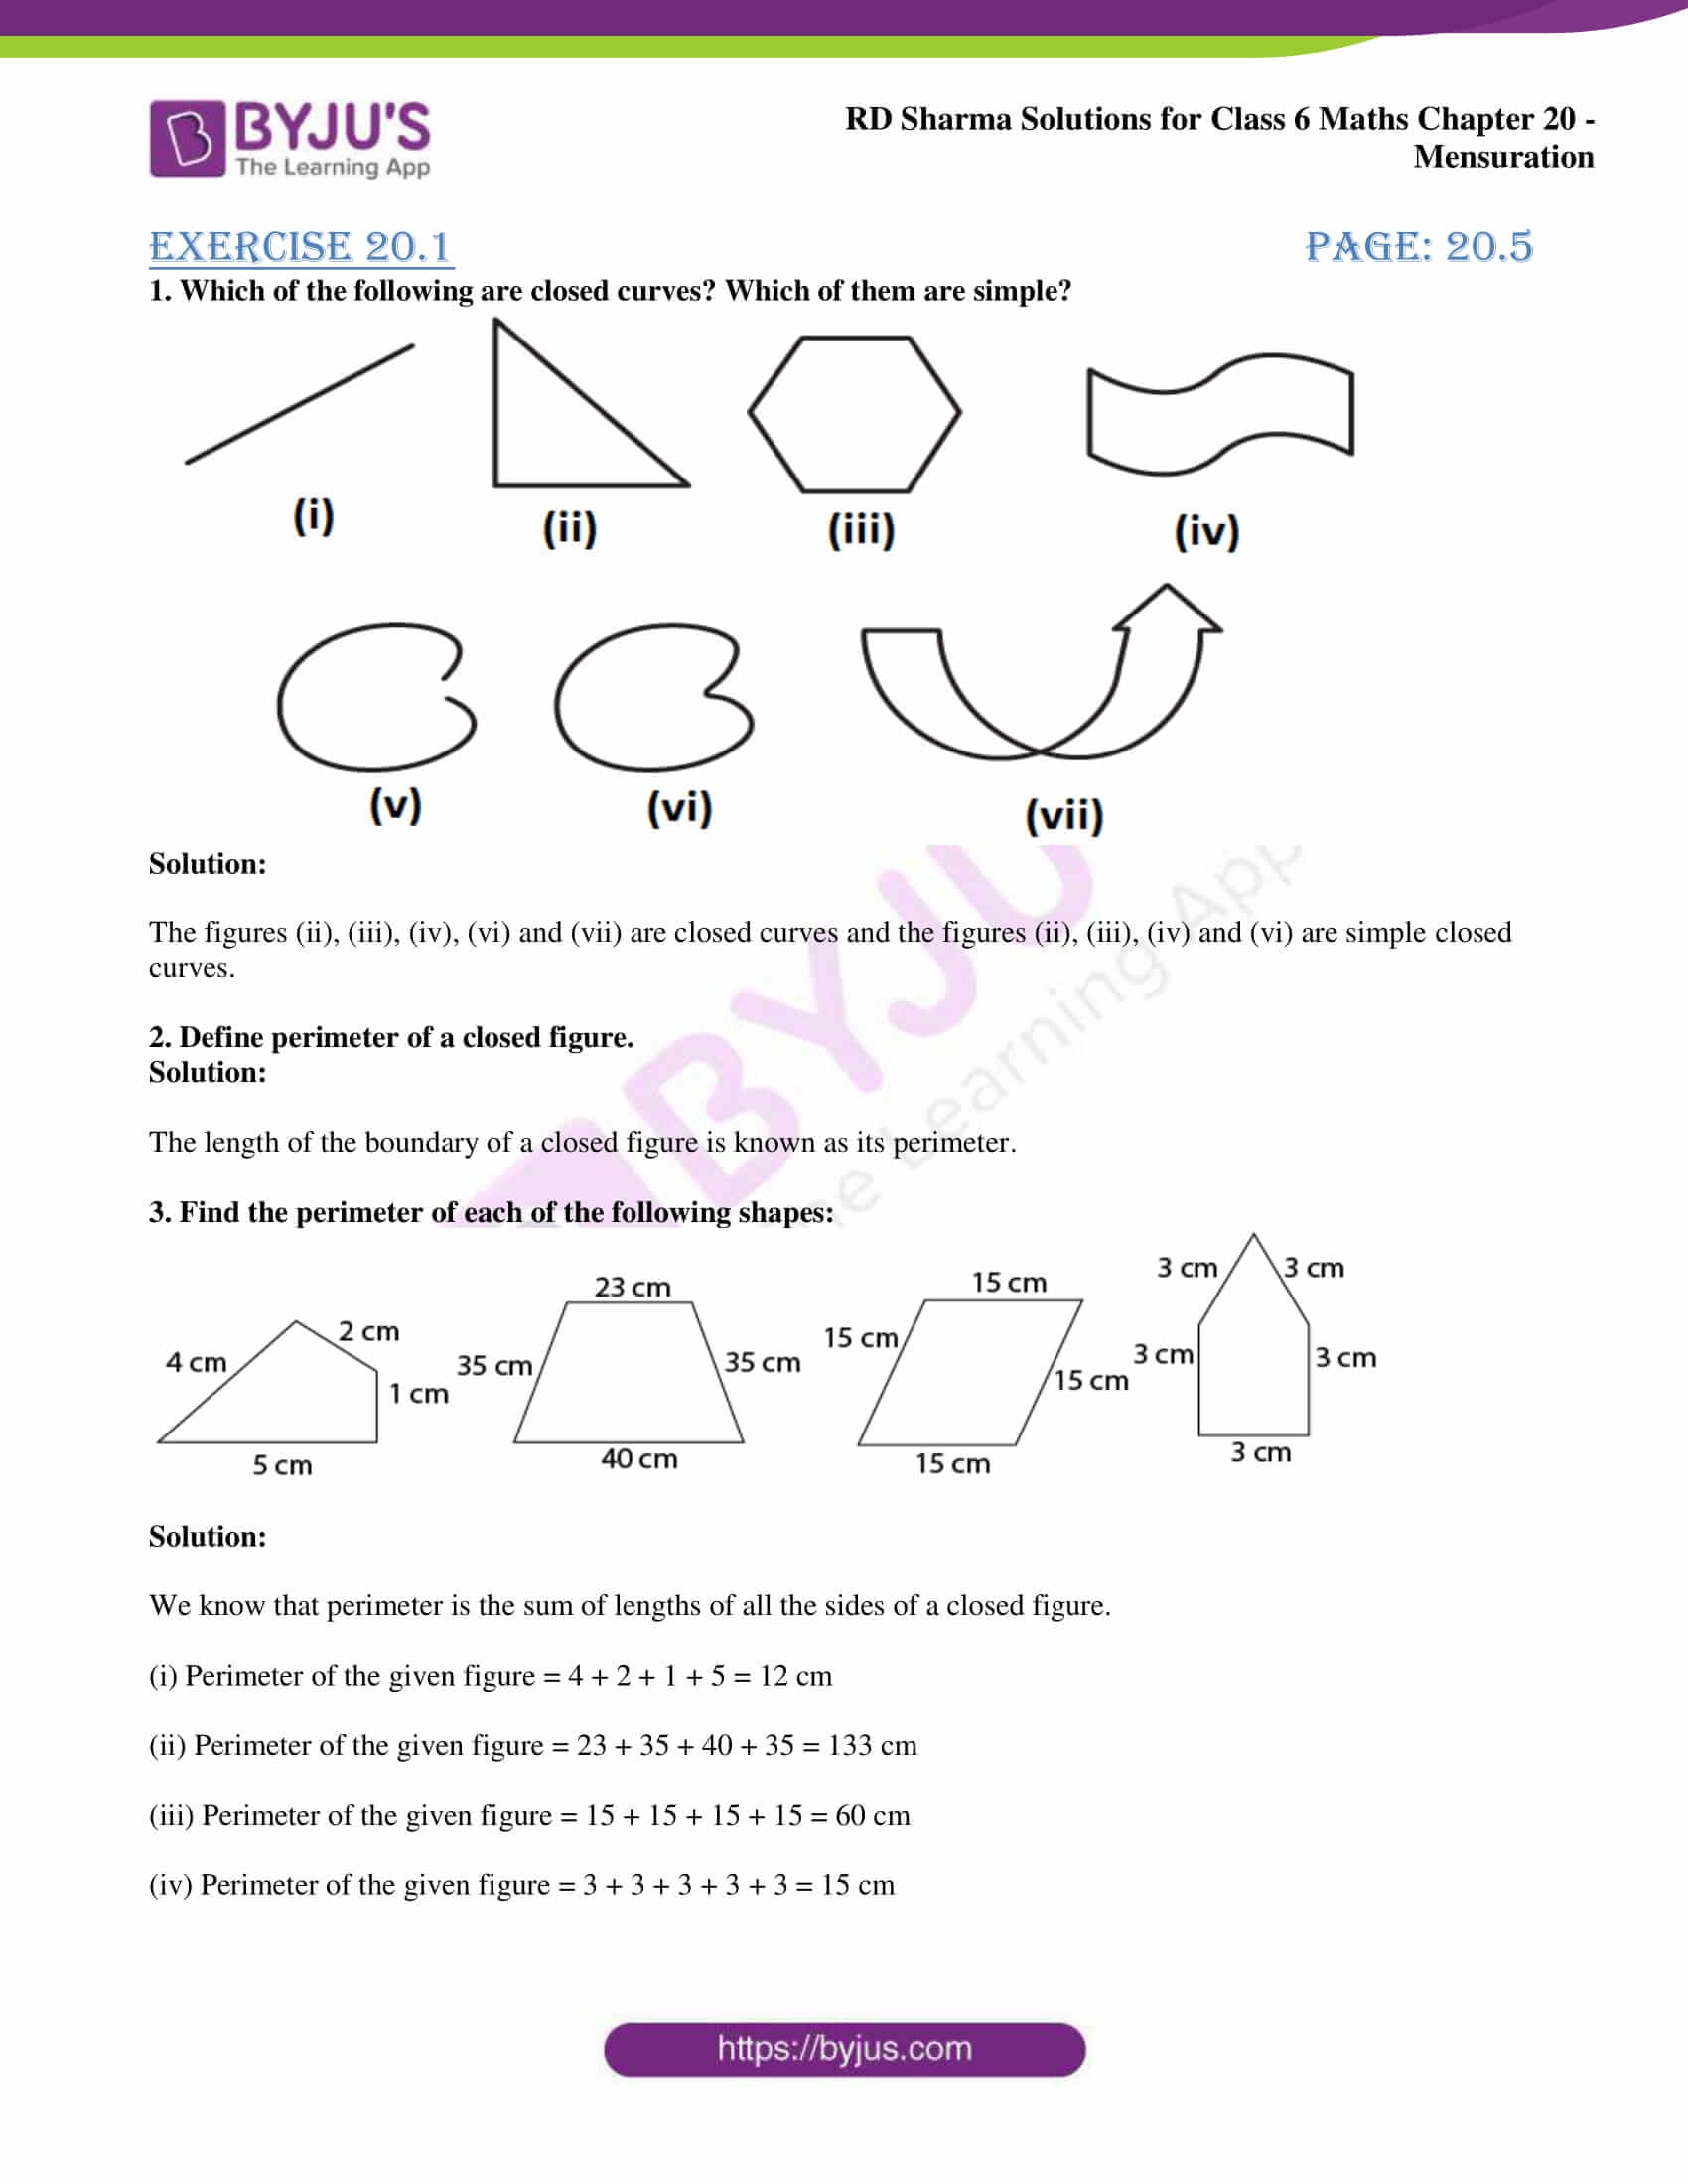 RD Sharma Solutions For Class 6 Chapter 20 Mensuration Access PDF Math Worksheet Answers